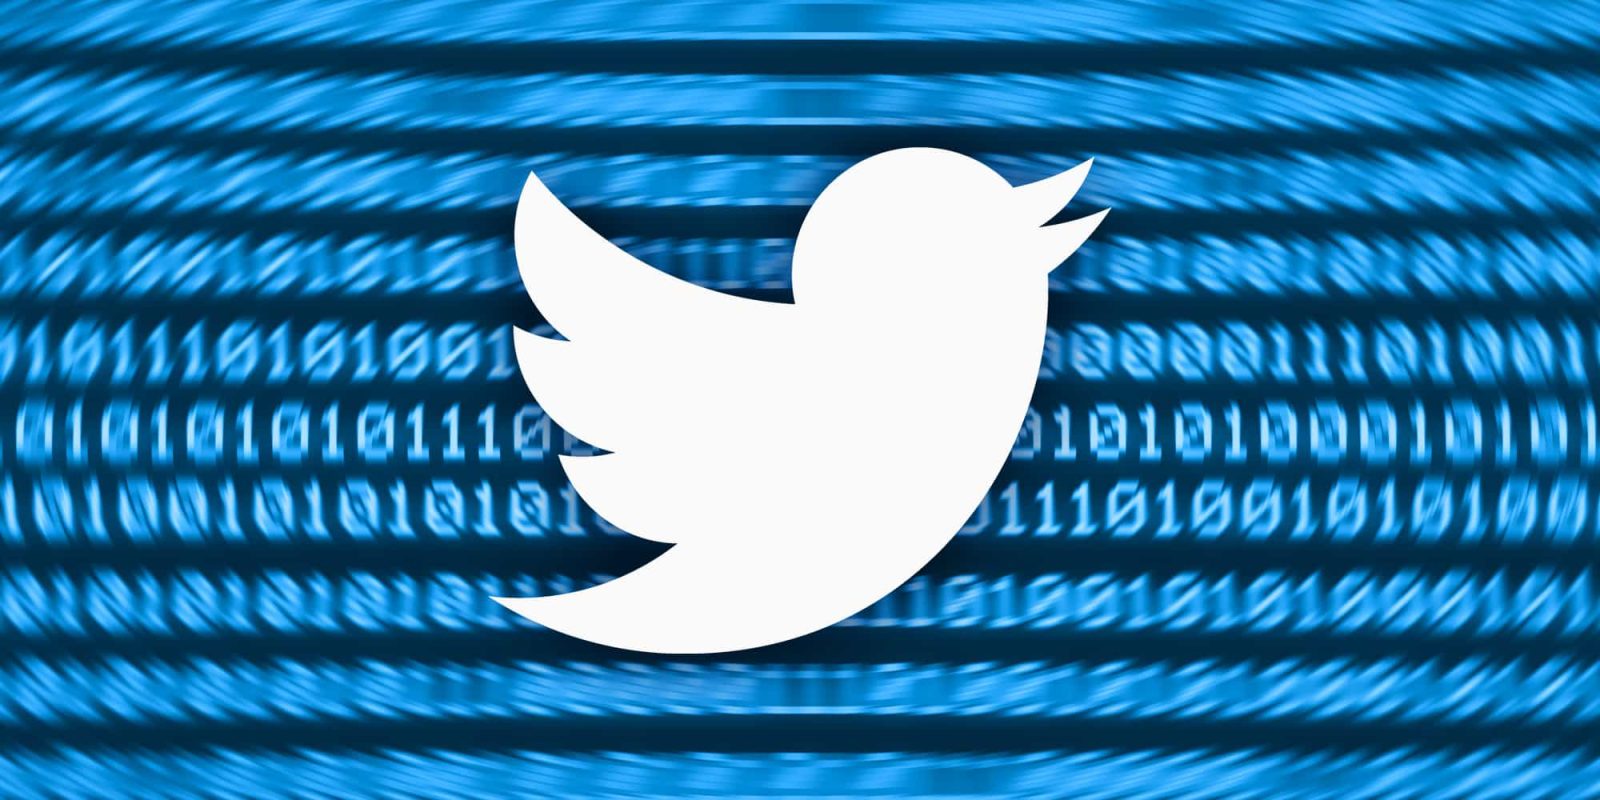 Twitter users complain about seeing tweets from accounts they don't follow